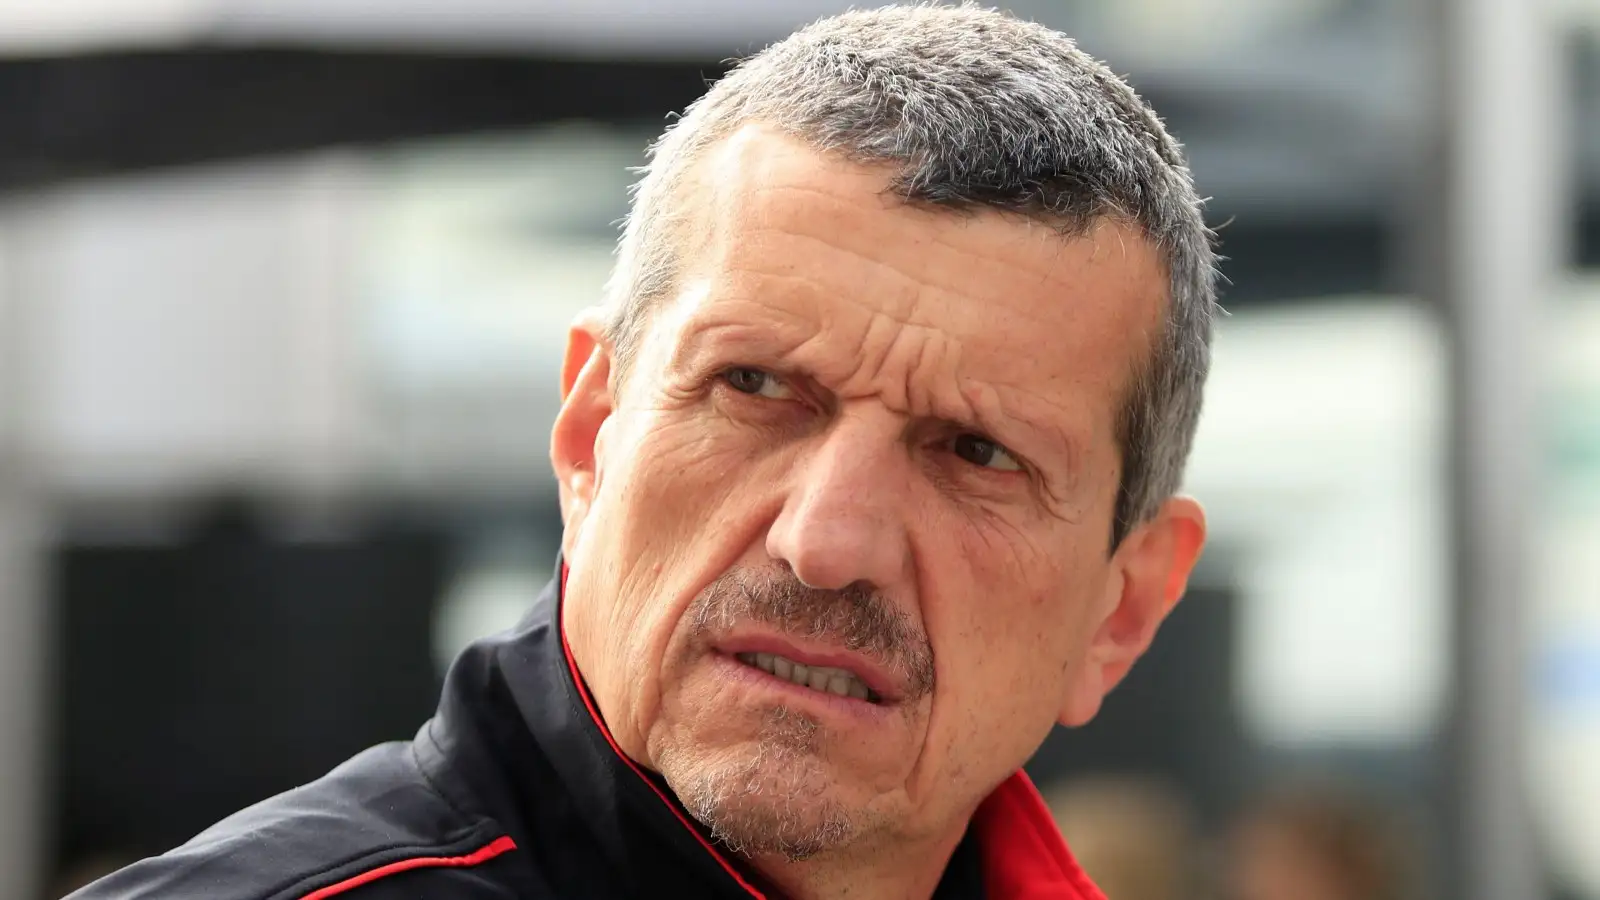 Former Haas team principal Guenther Steiner looking concerned.